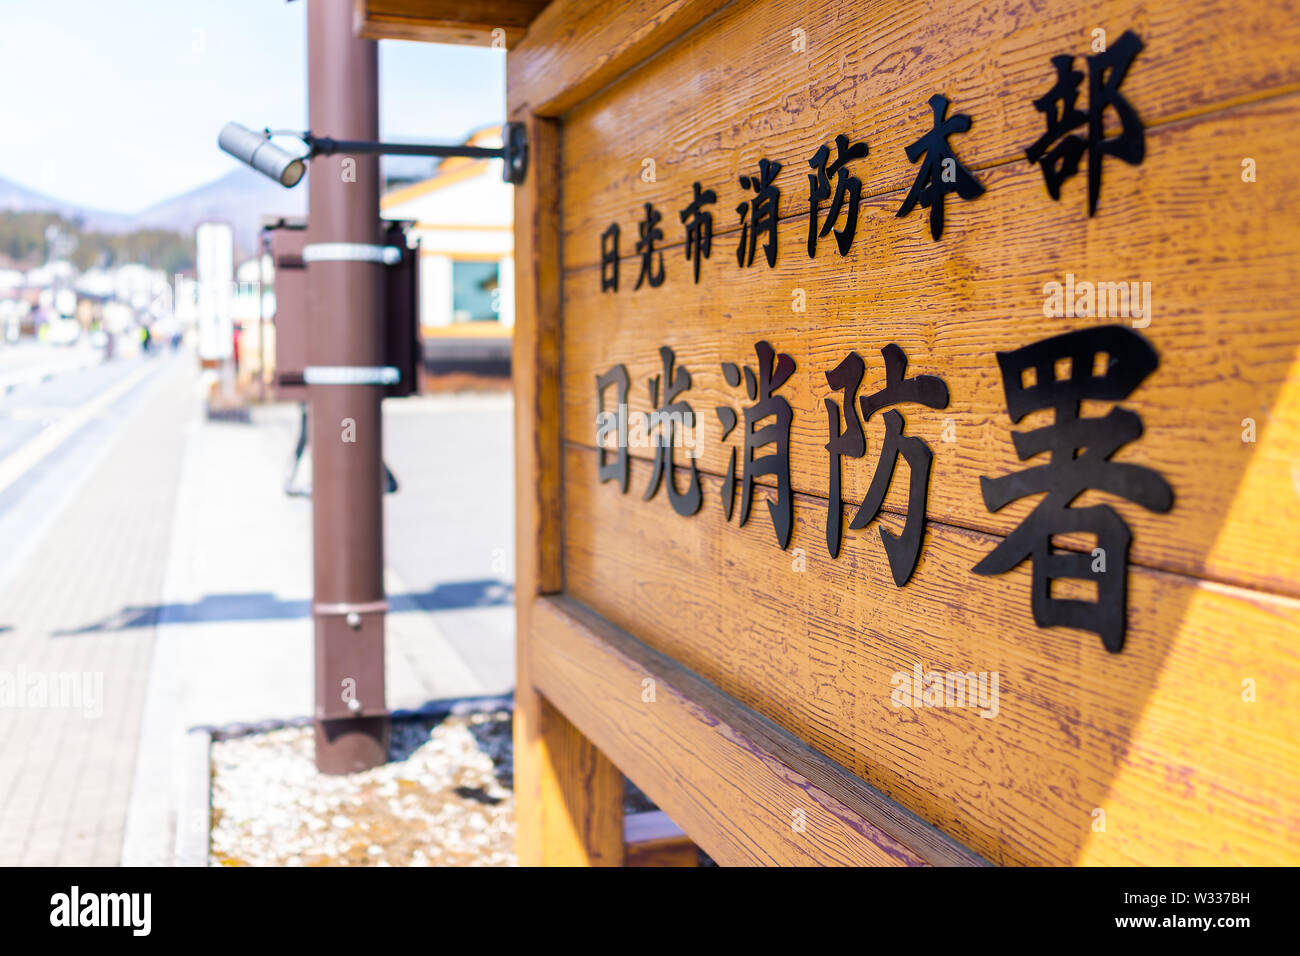 Nikko, Japan - April 4, 2019: Wooden board on street of mountain village with text saying Nikko City Fire Department sign Stock Photo